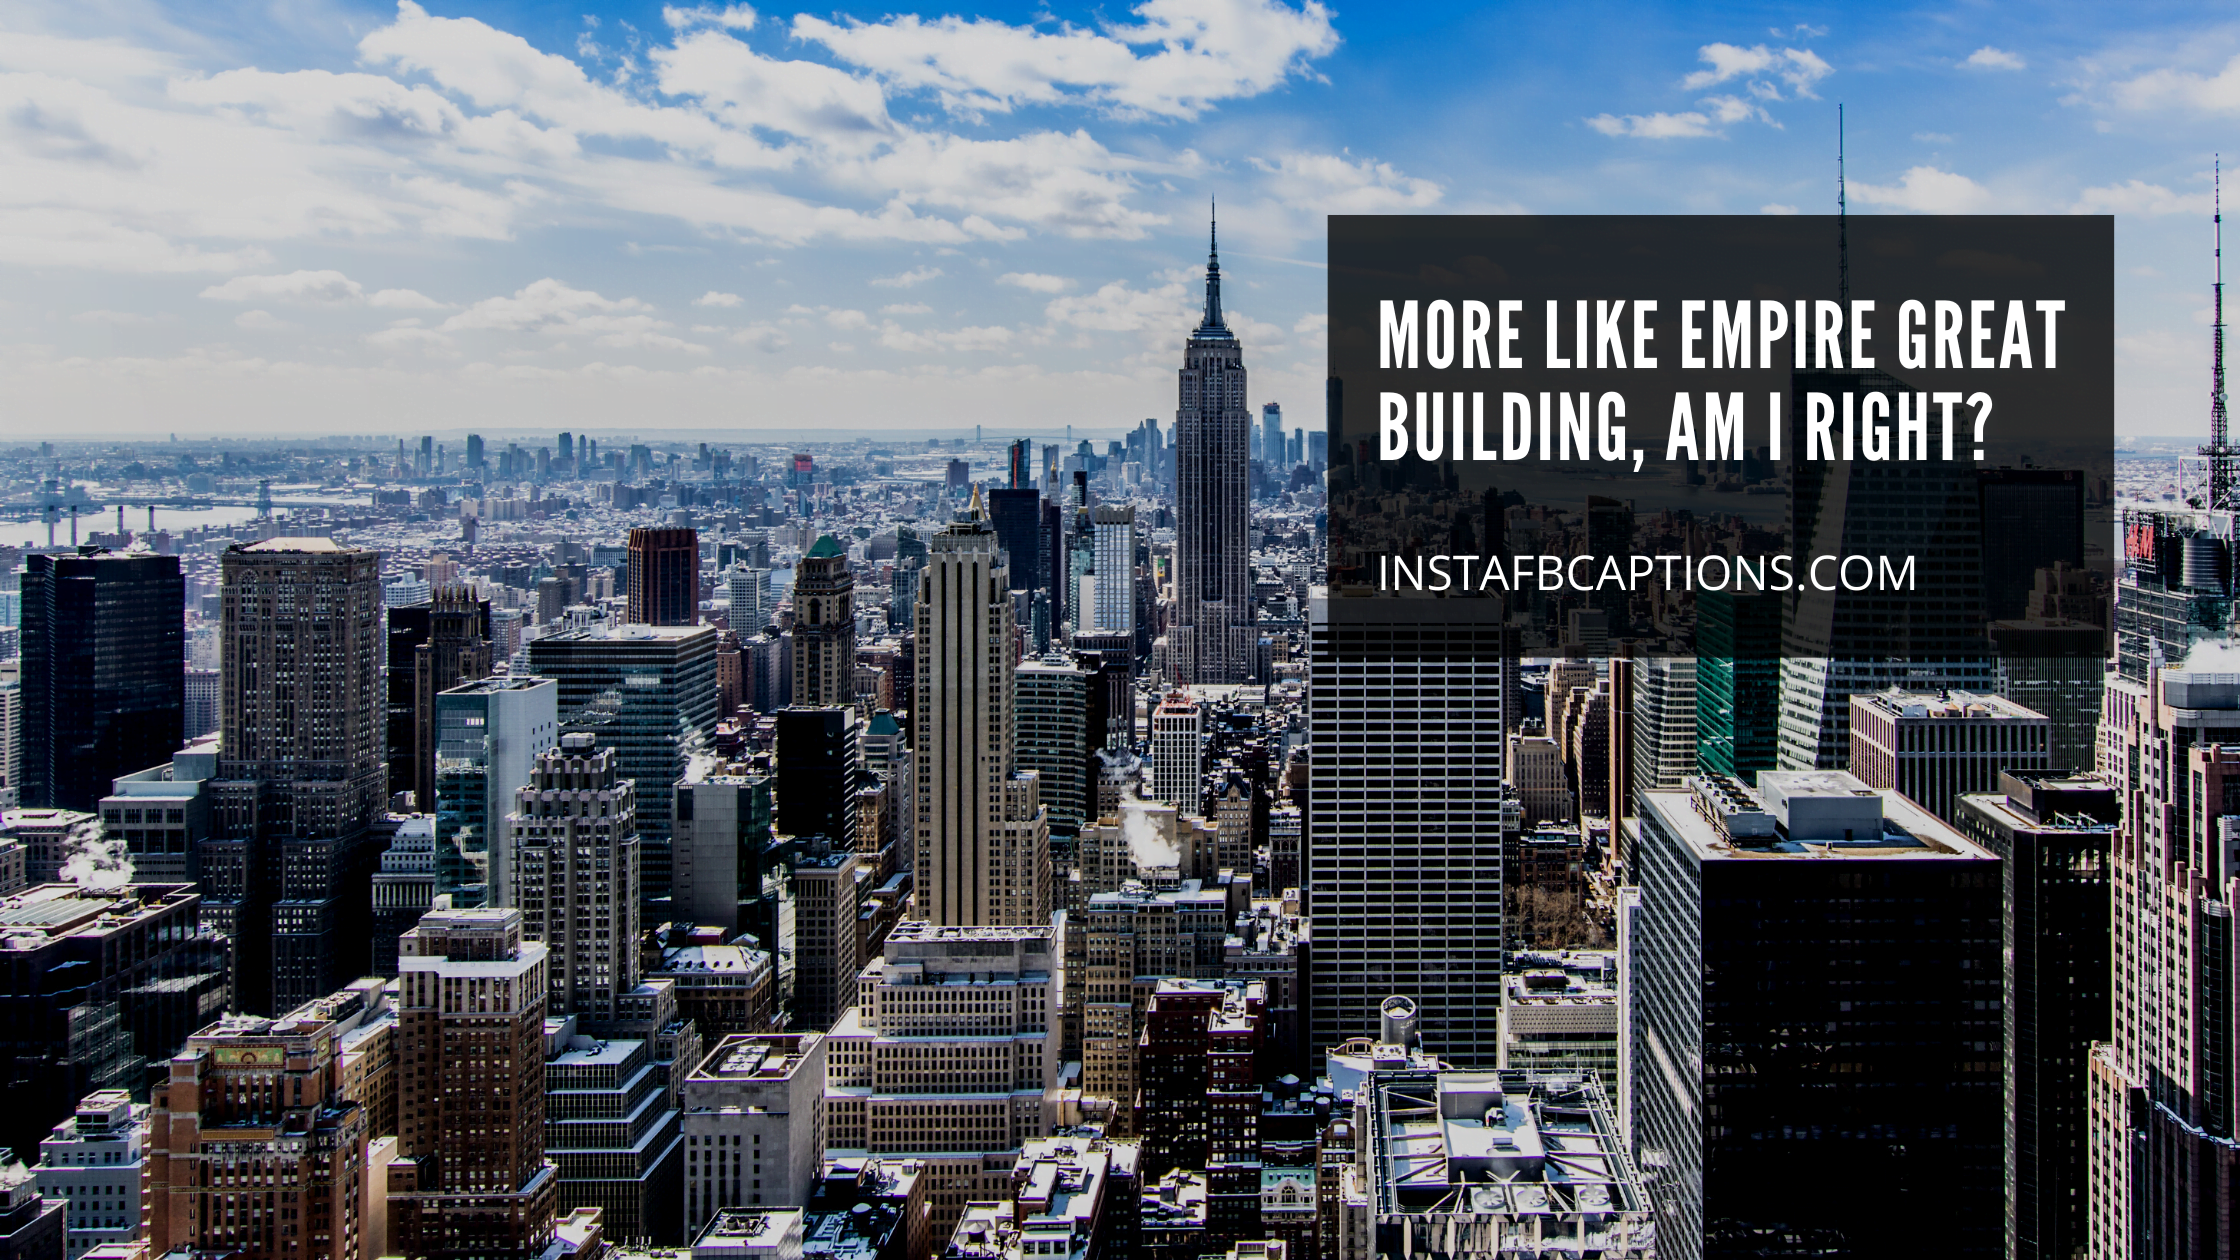 Amusing Empire State Building Puns And Funny Captions  - Amusing Empire State Building Puns and Funny Captions  - 101 Empire State Building Instagram Captions Quotes Hashtags in 2022